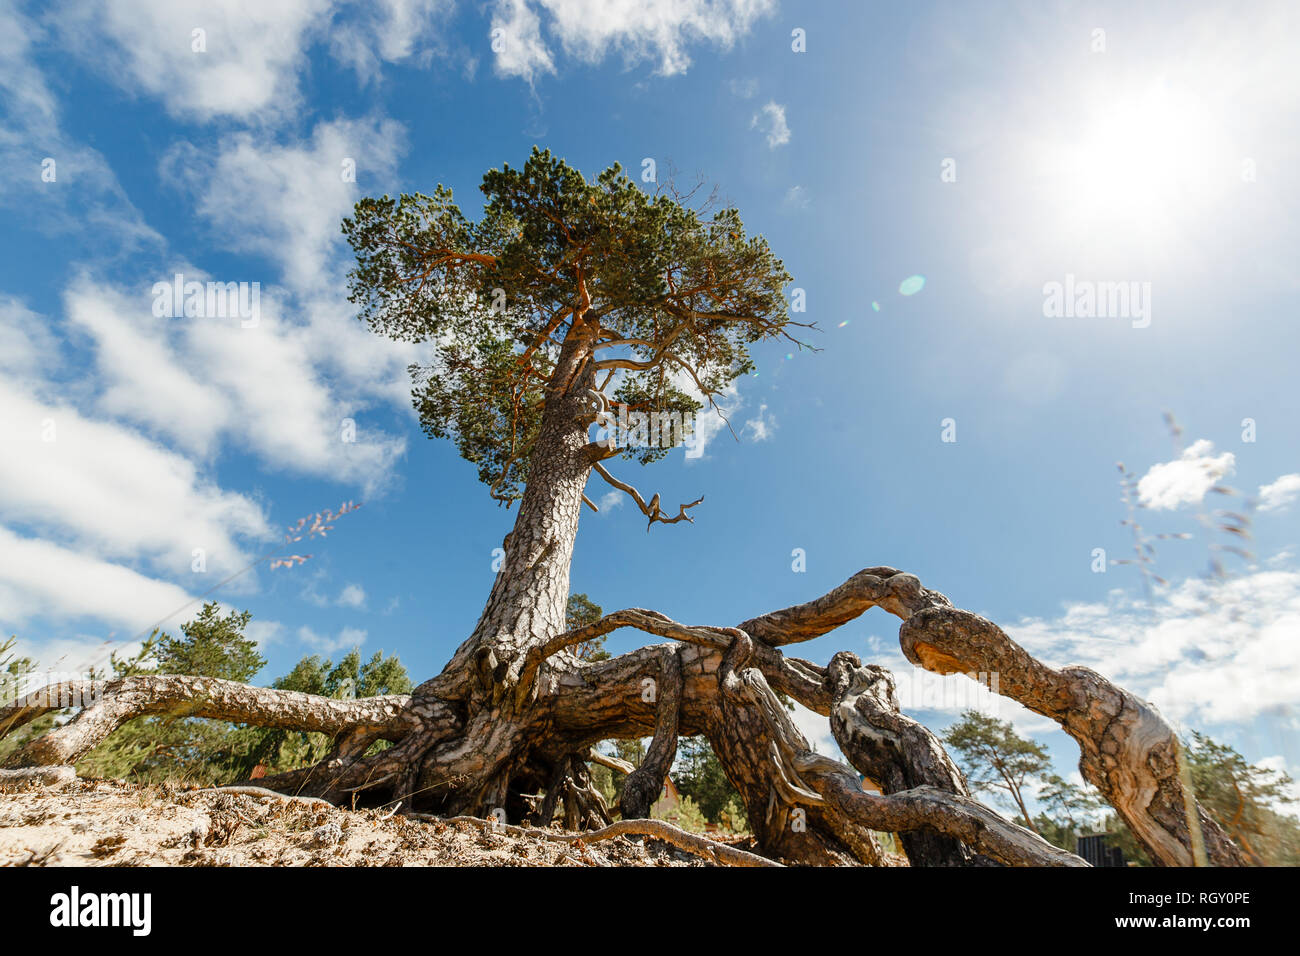 Beautiful old pine tree with large root system on the sandy coast. Stock Photo